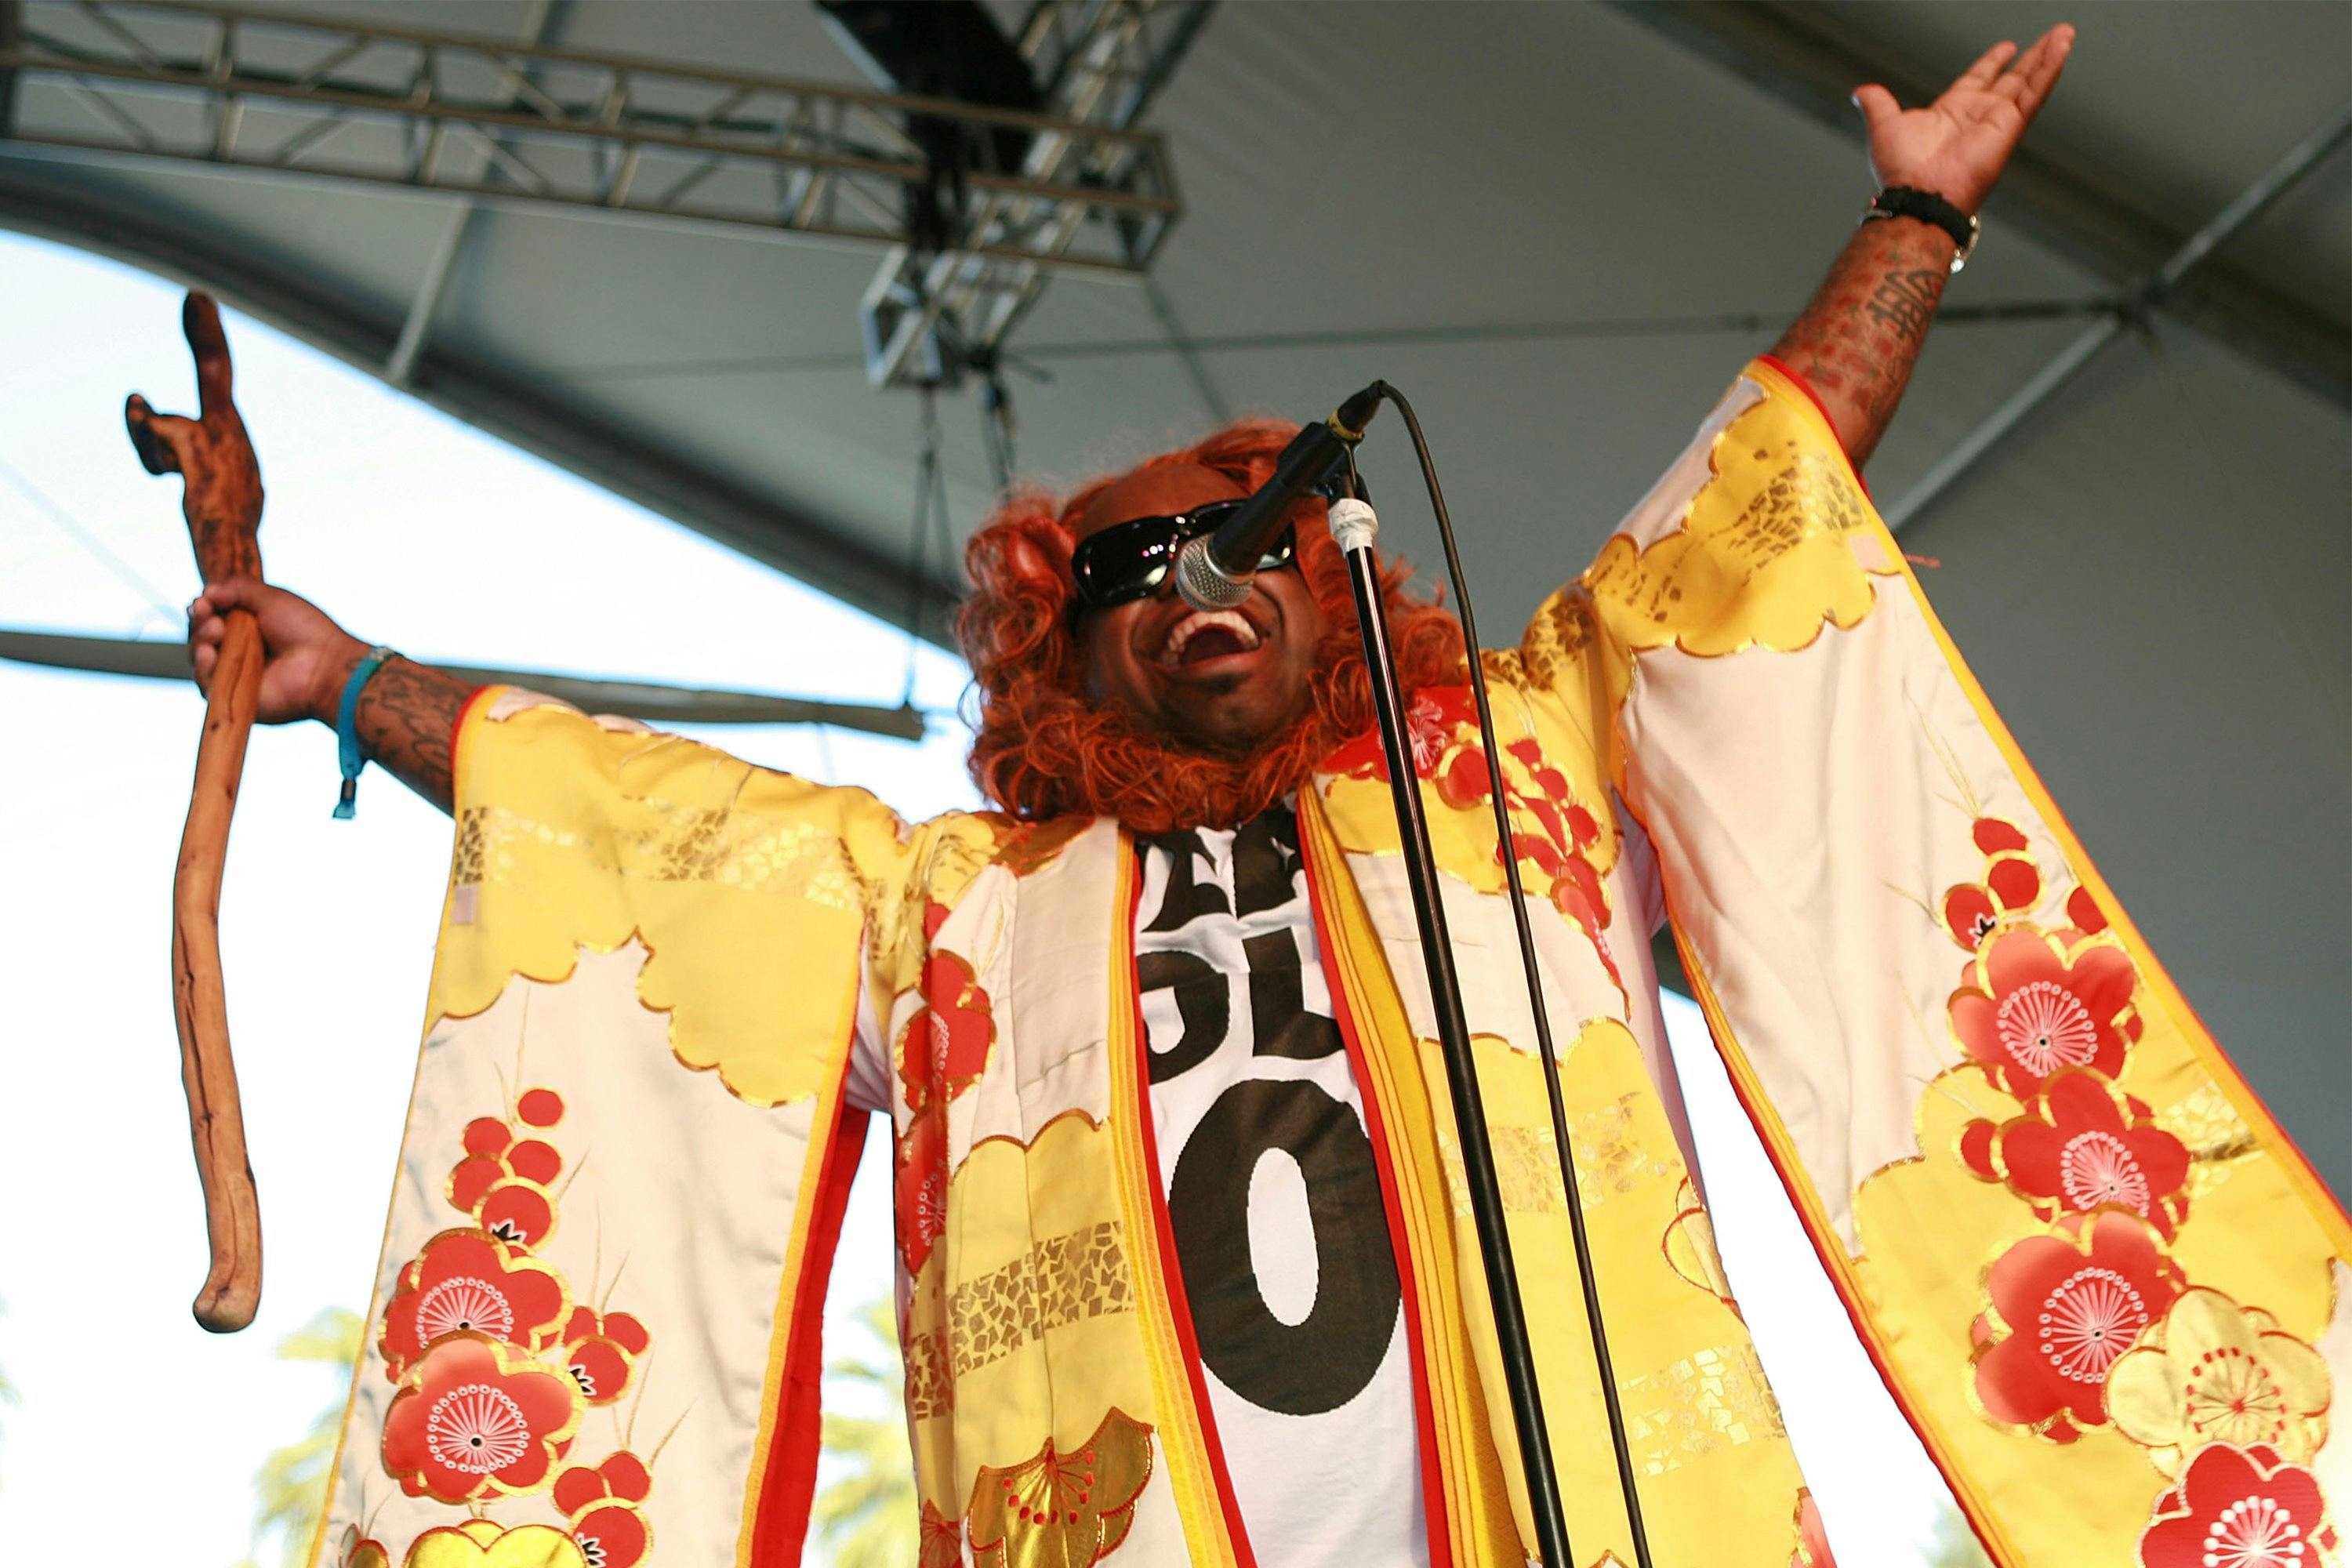 Gnarls Barkley performing at the 2006 Coachella Valley Music Festival April 30, 2006 in Indio, California. (Photo by Bob Berg/Getty Images)